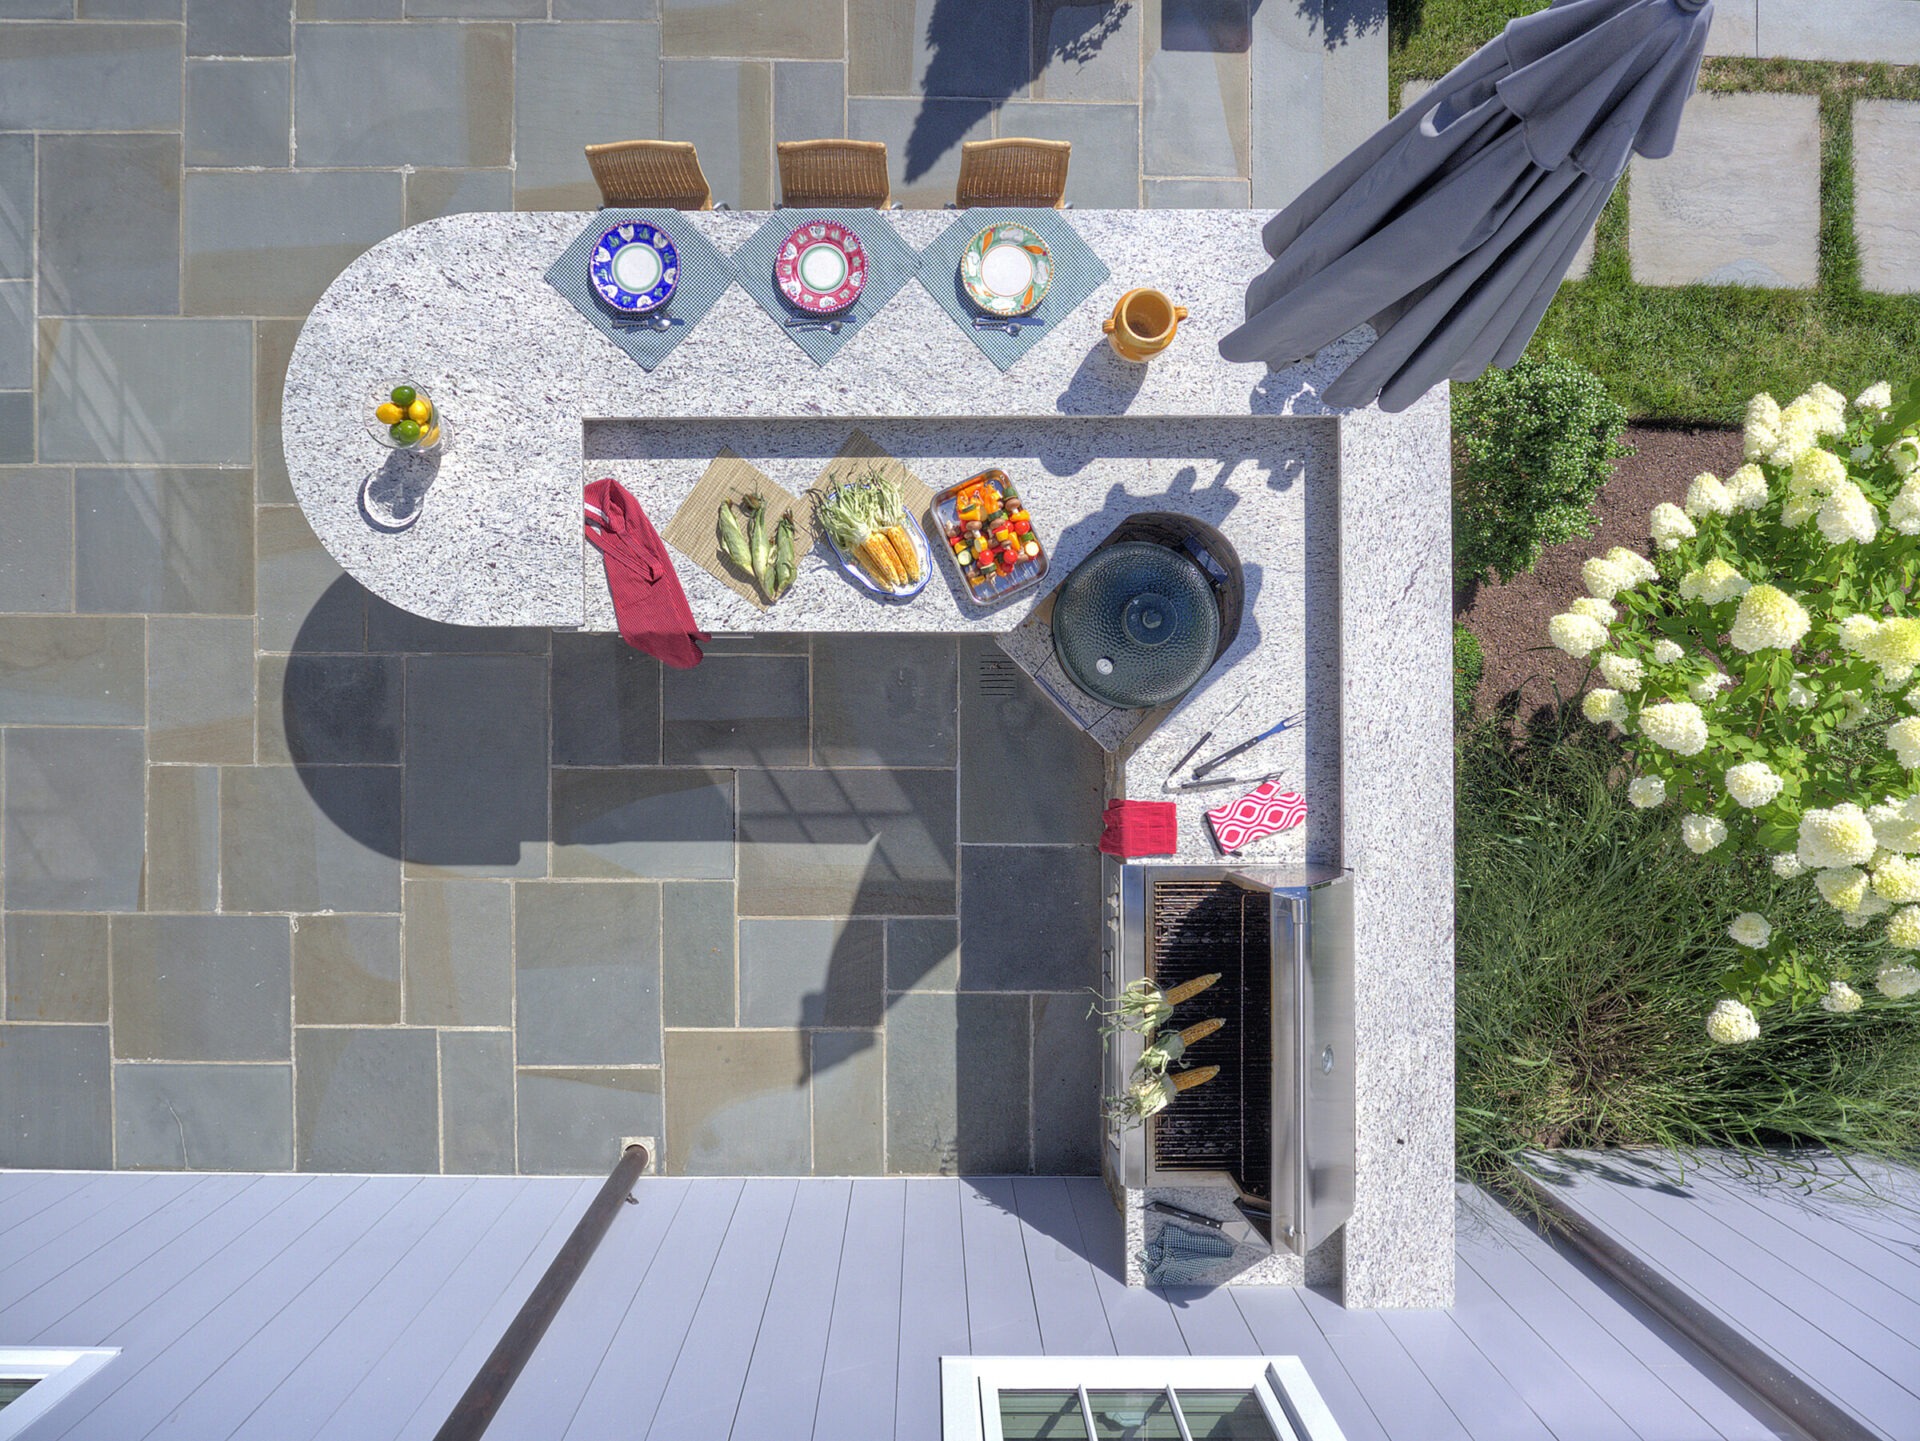 Aerial view of an outdoor kitchen counter with bar stools, a grill, plates, food, cooking utensils, a closed umbrella, and flowering bushes nearby.